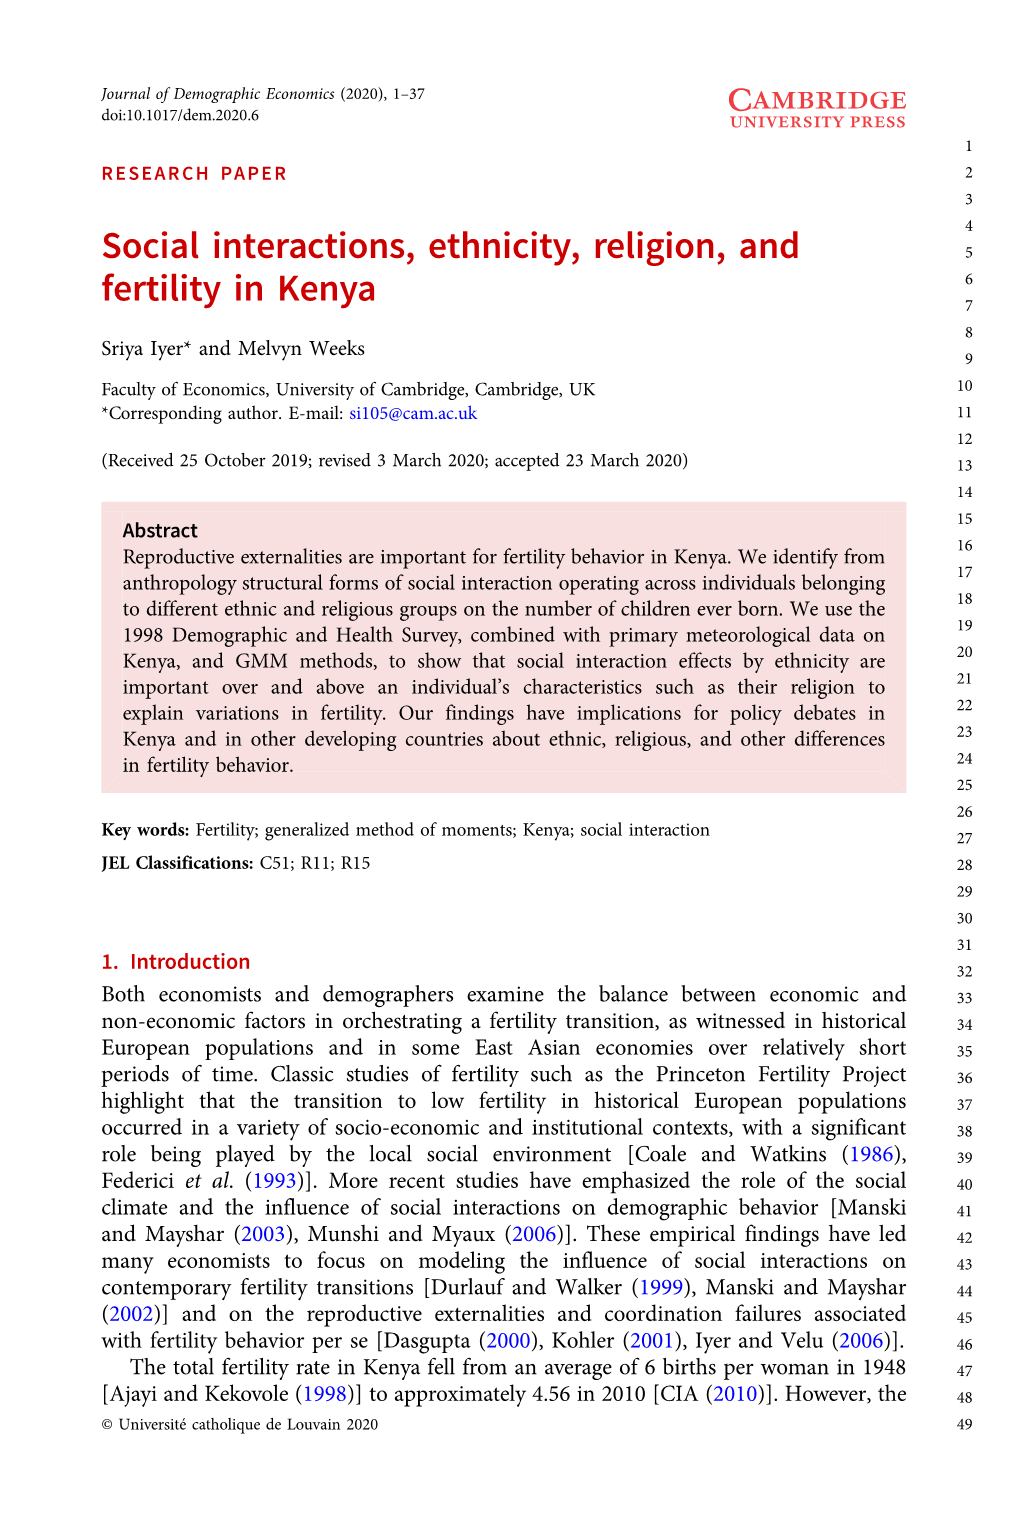 Social Interactions, Ethnicity, Religion, and Fertility in Kenya